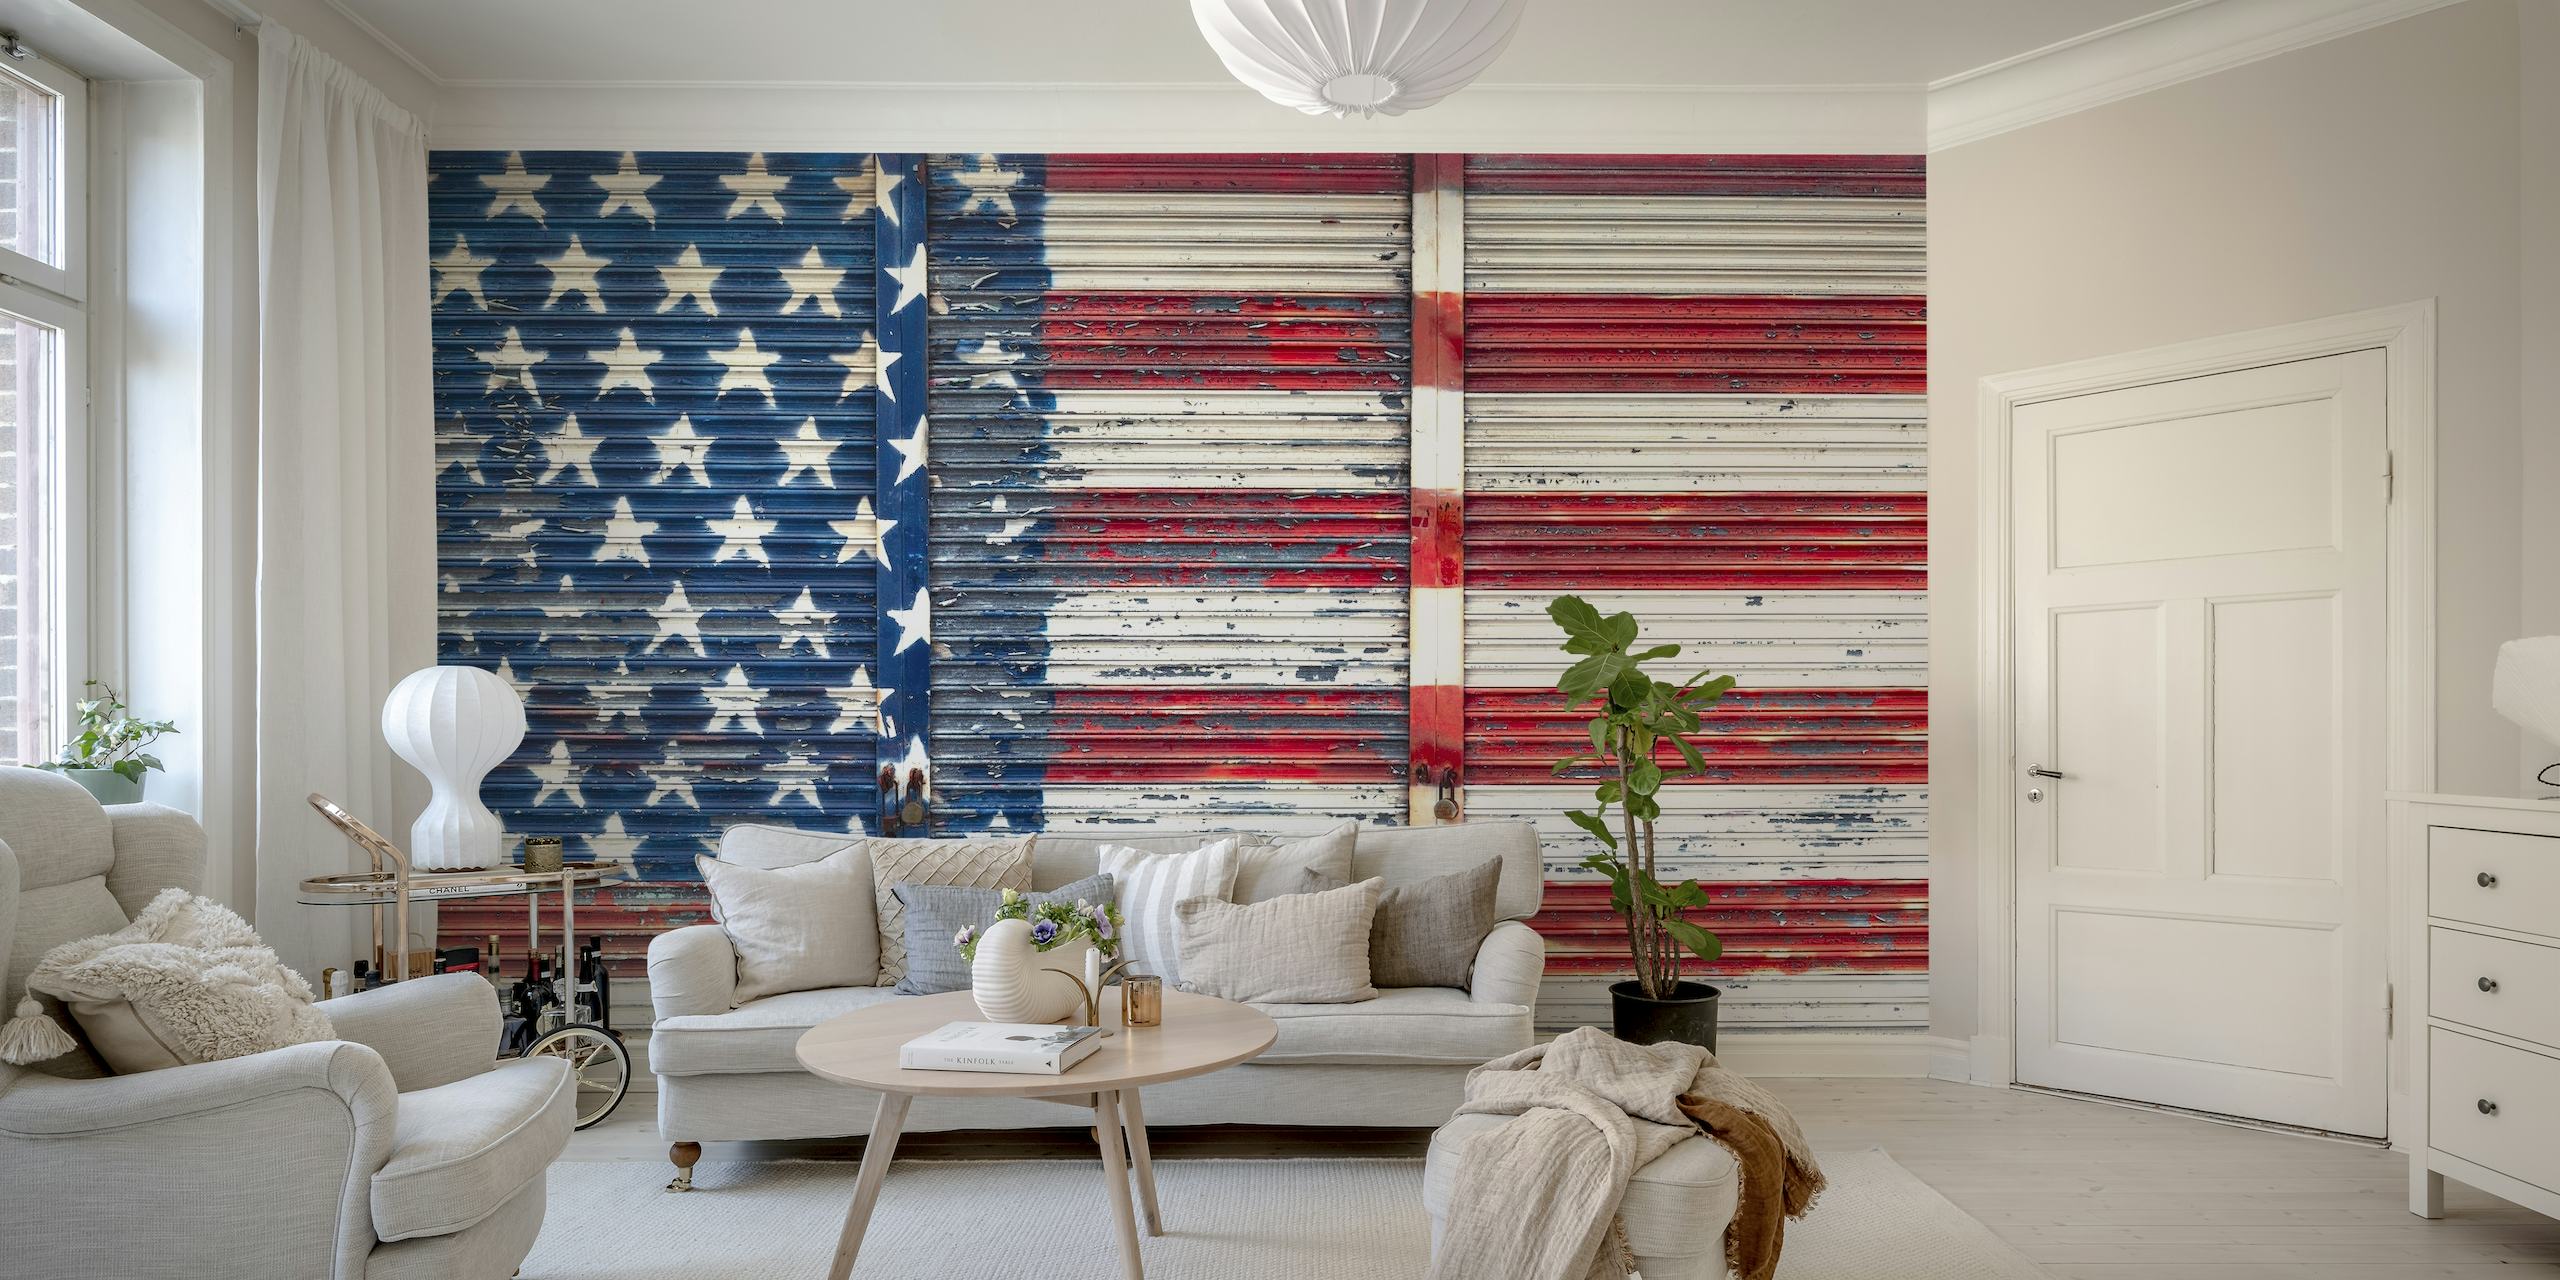 Stars and Stripes wallpaper